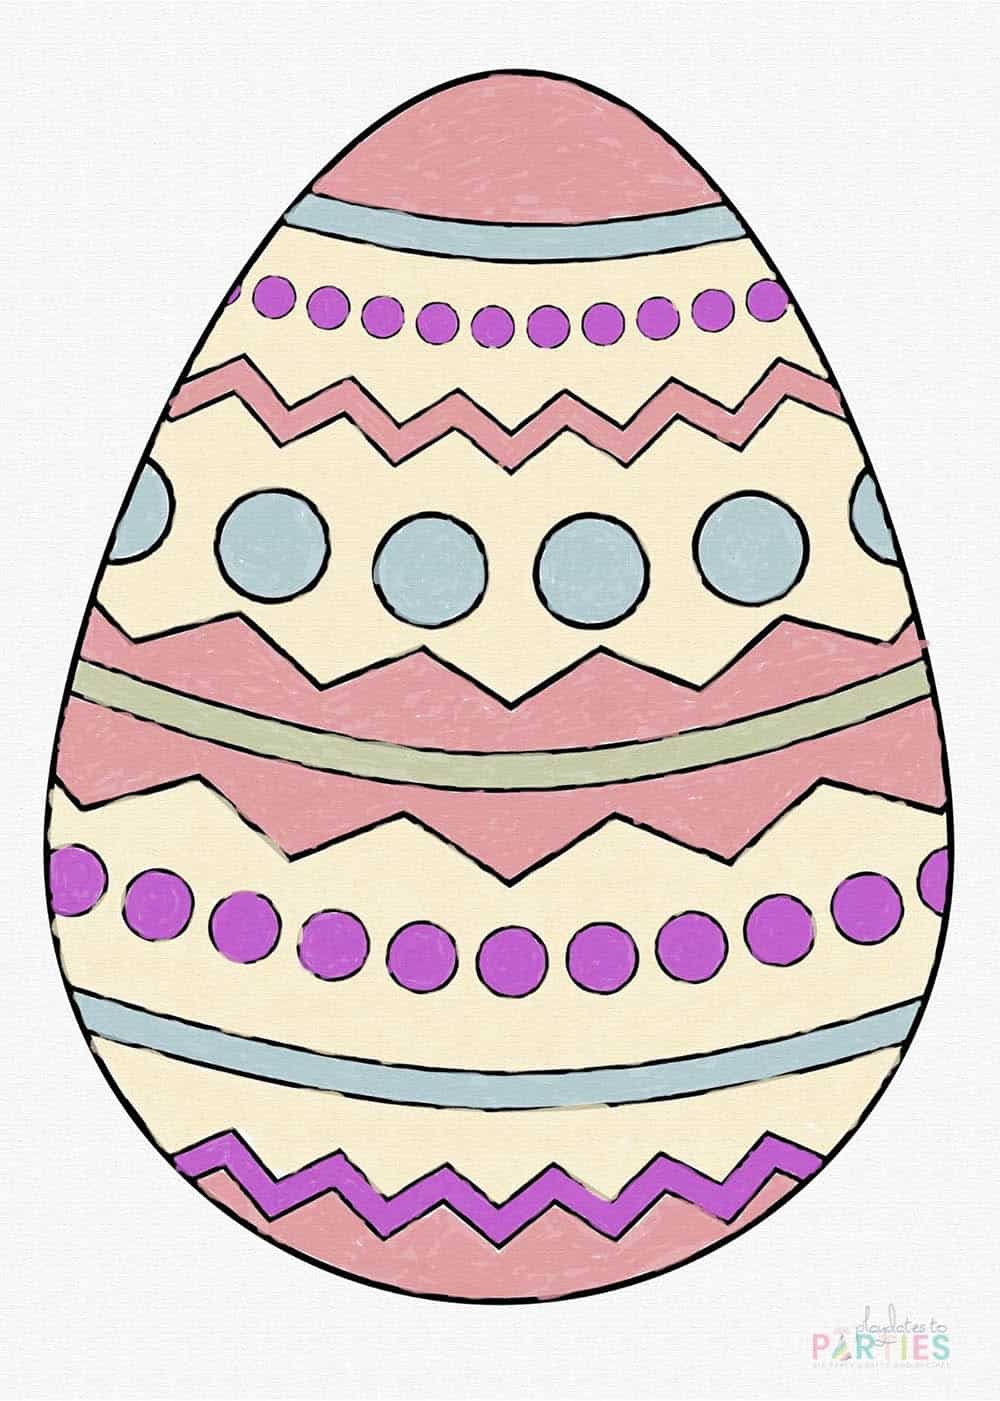 Finished Easter egg coloring page for kids with zig zags, stripes, and polka dots.